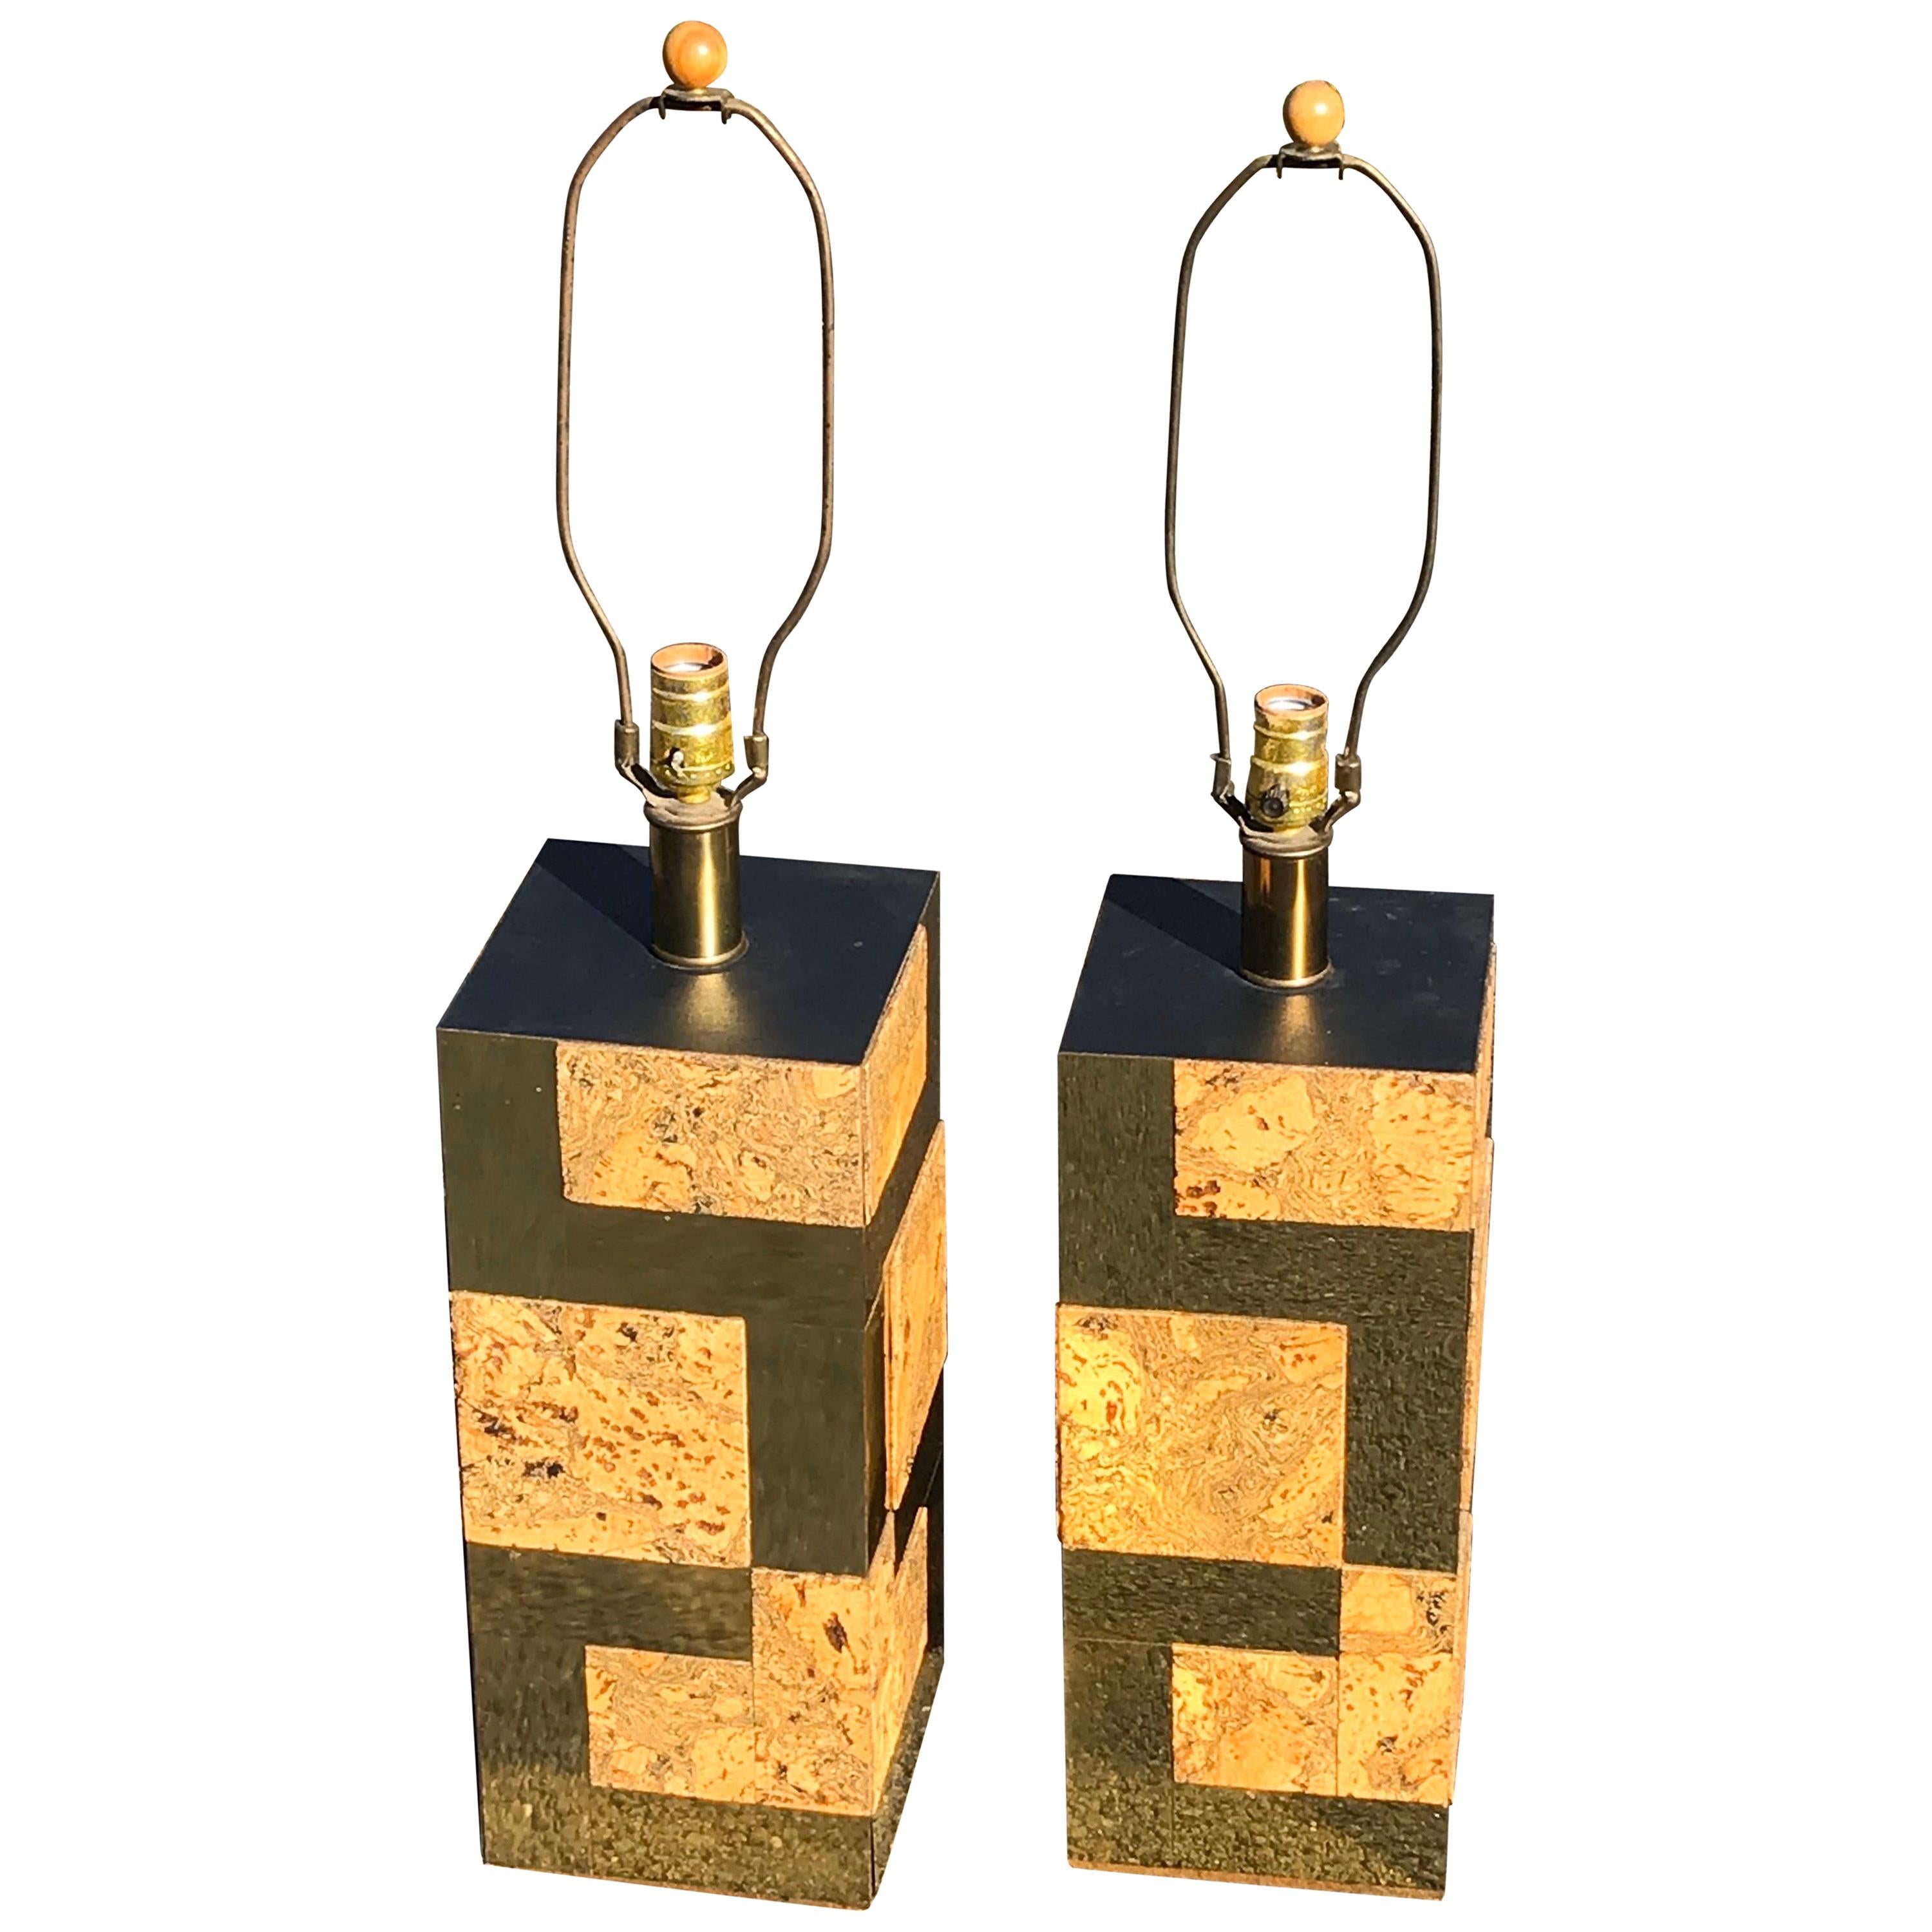 Pair of Mid-Century Modern Paul Evans "Cityscape" Table Lamps, 1970s